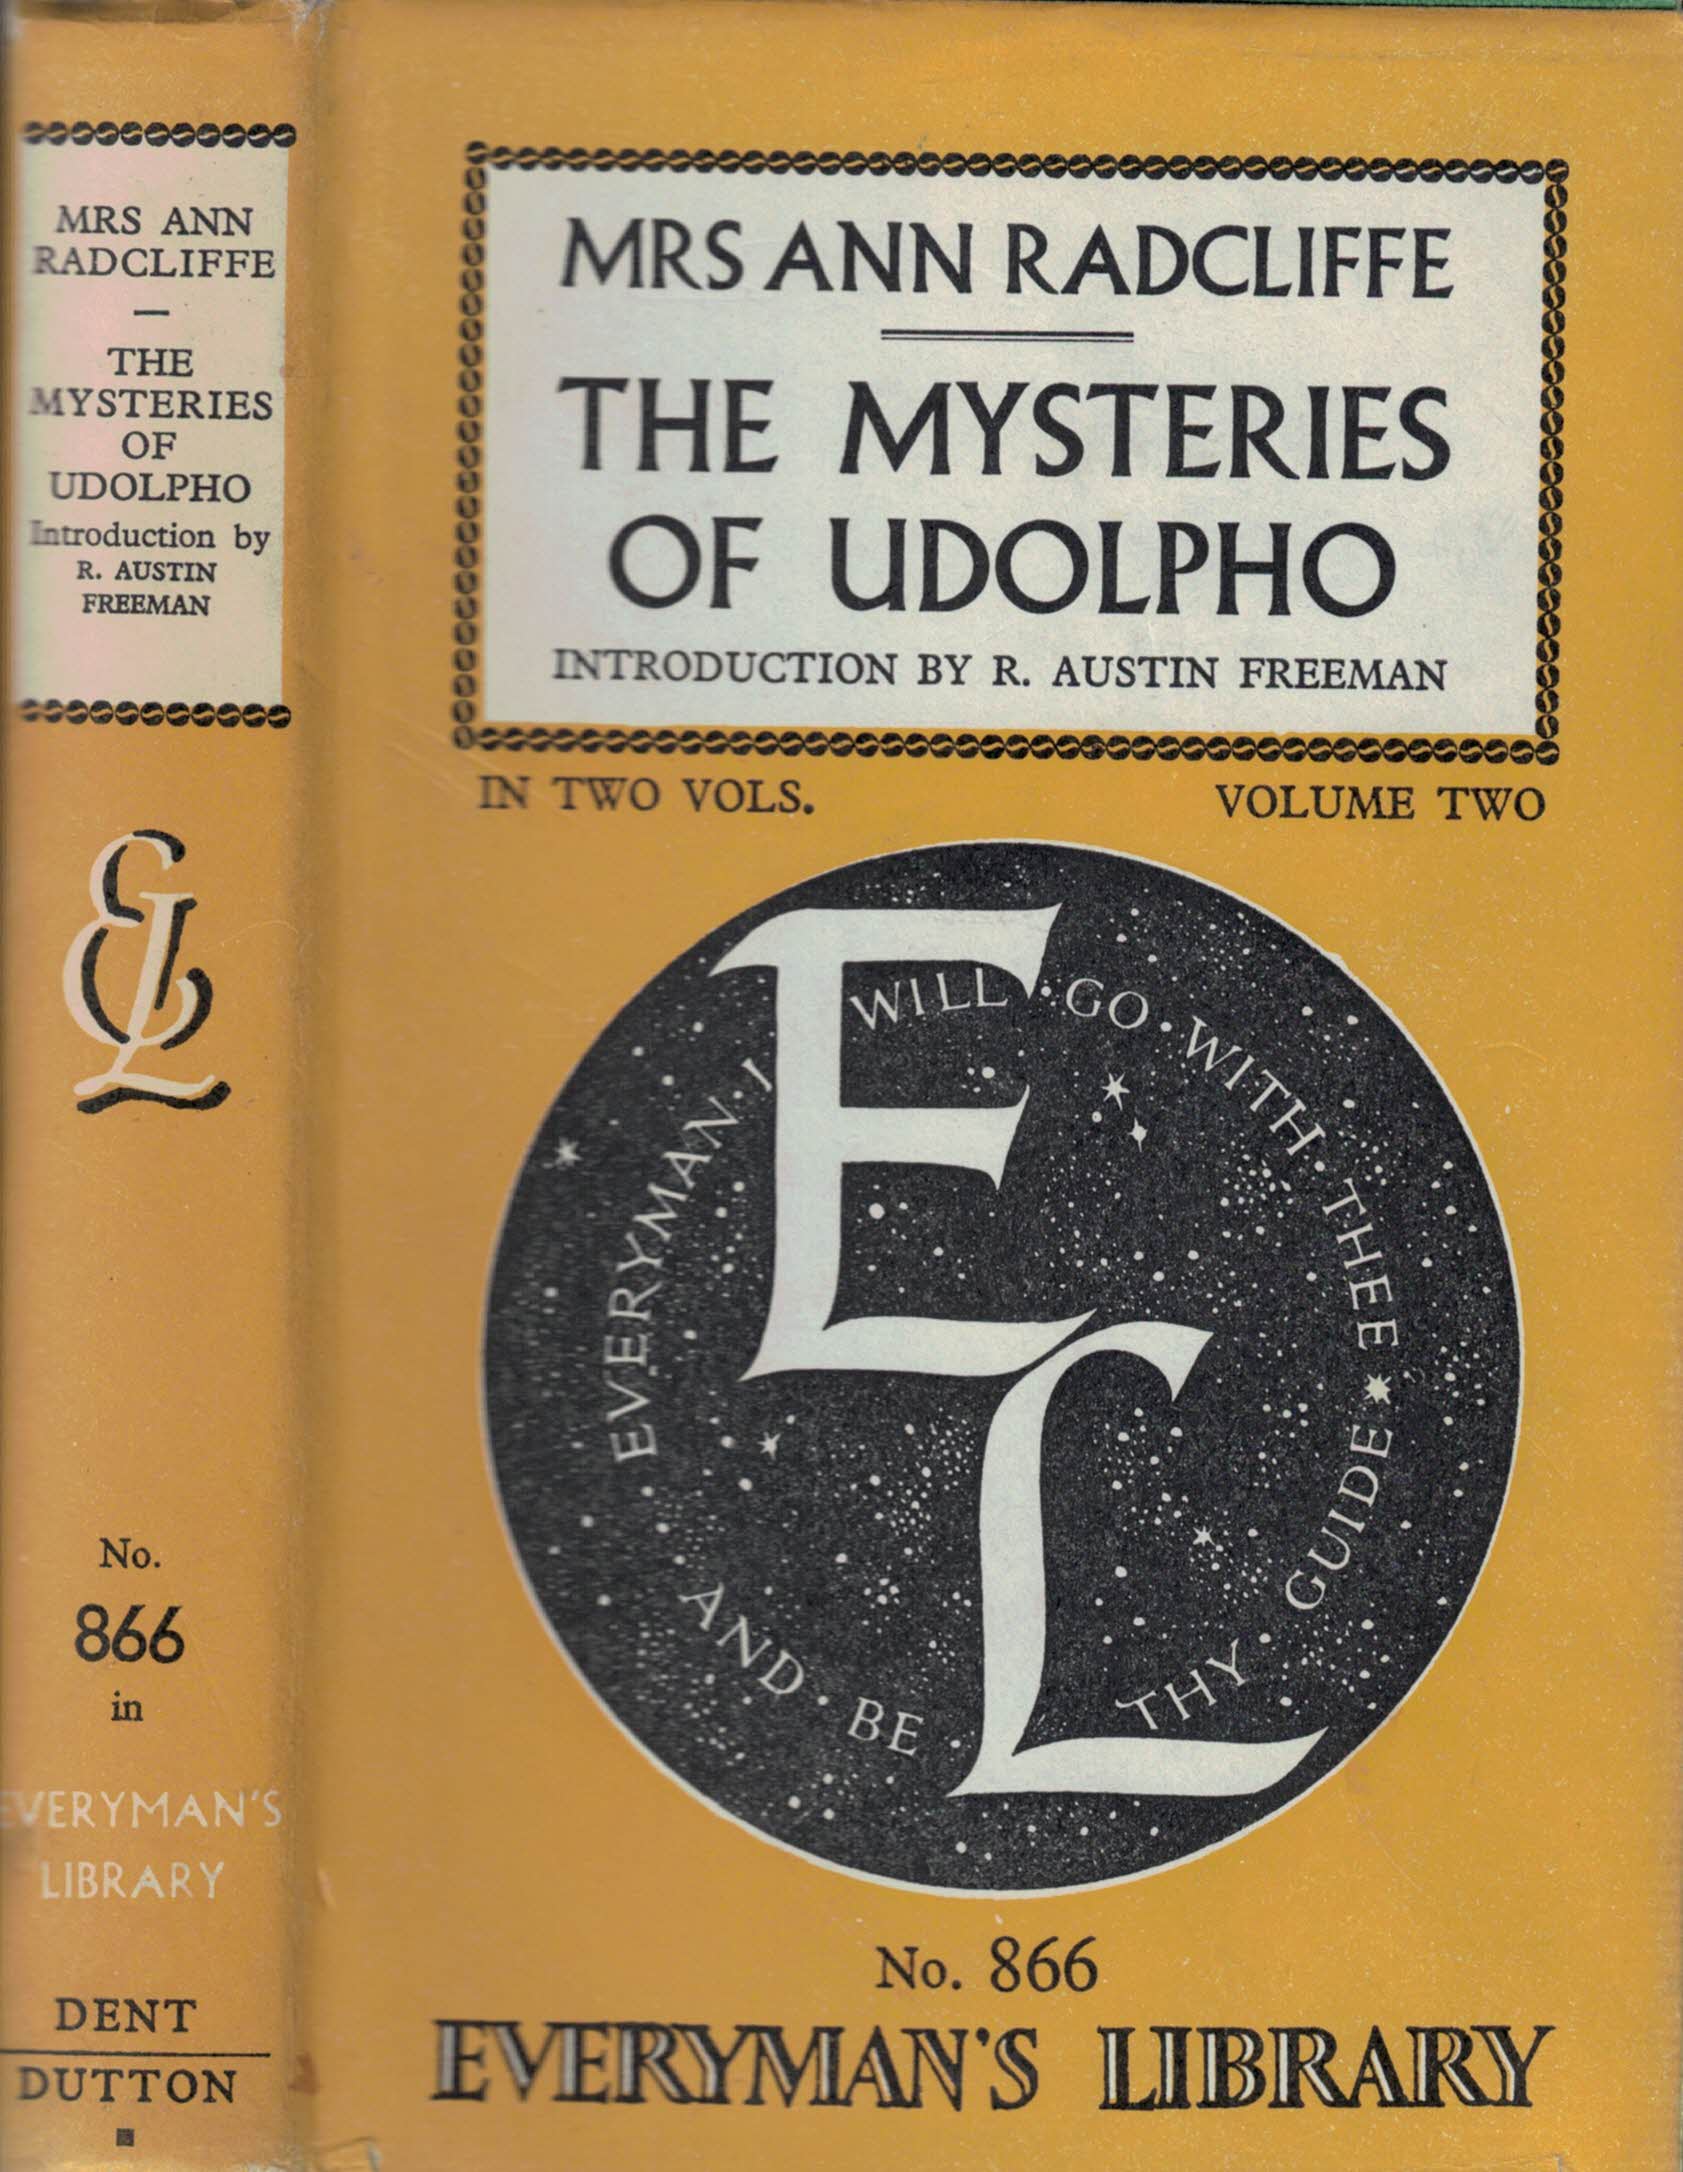 The Mysteries of Udolpho. Volume 2. Everyman's Library No. 866.